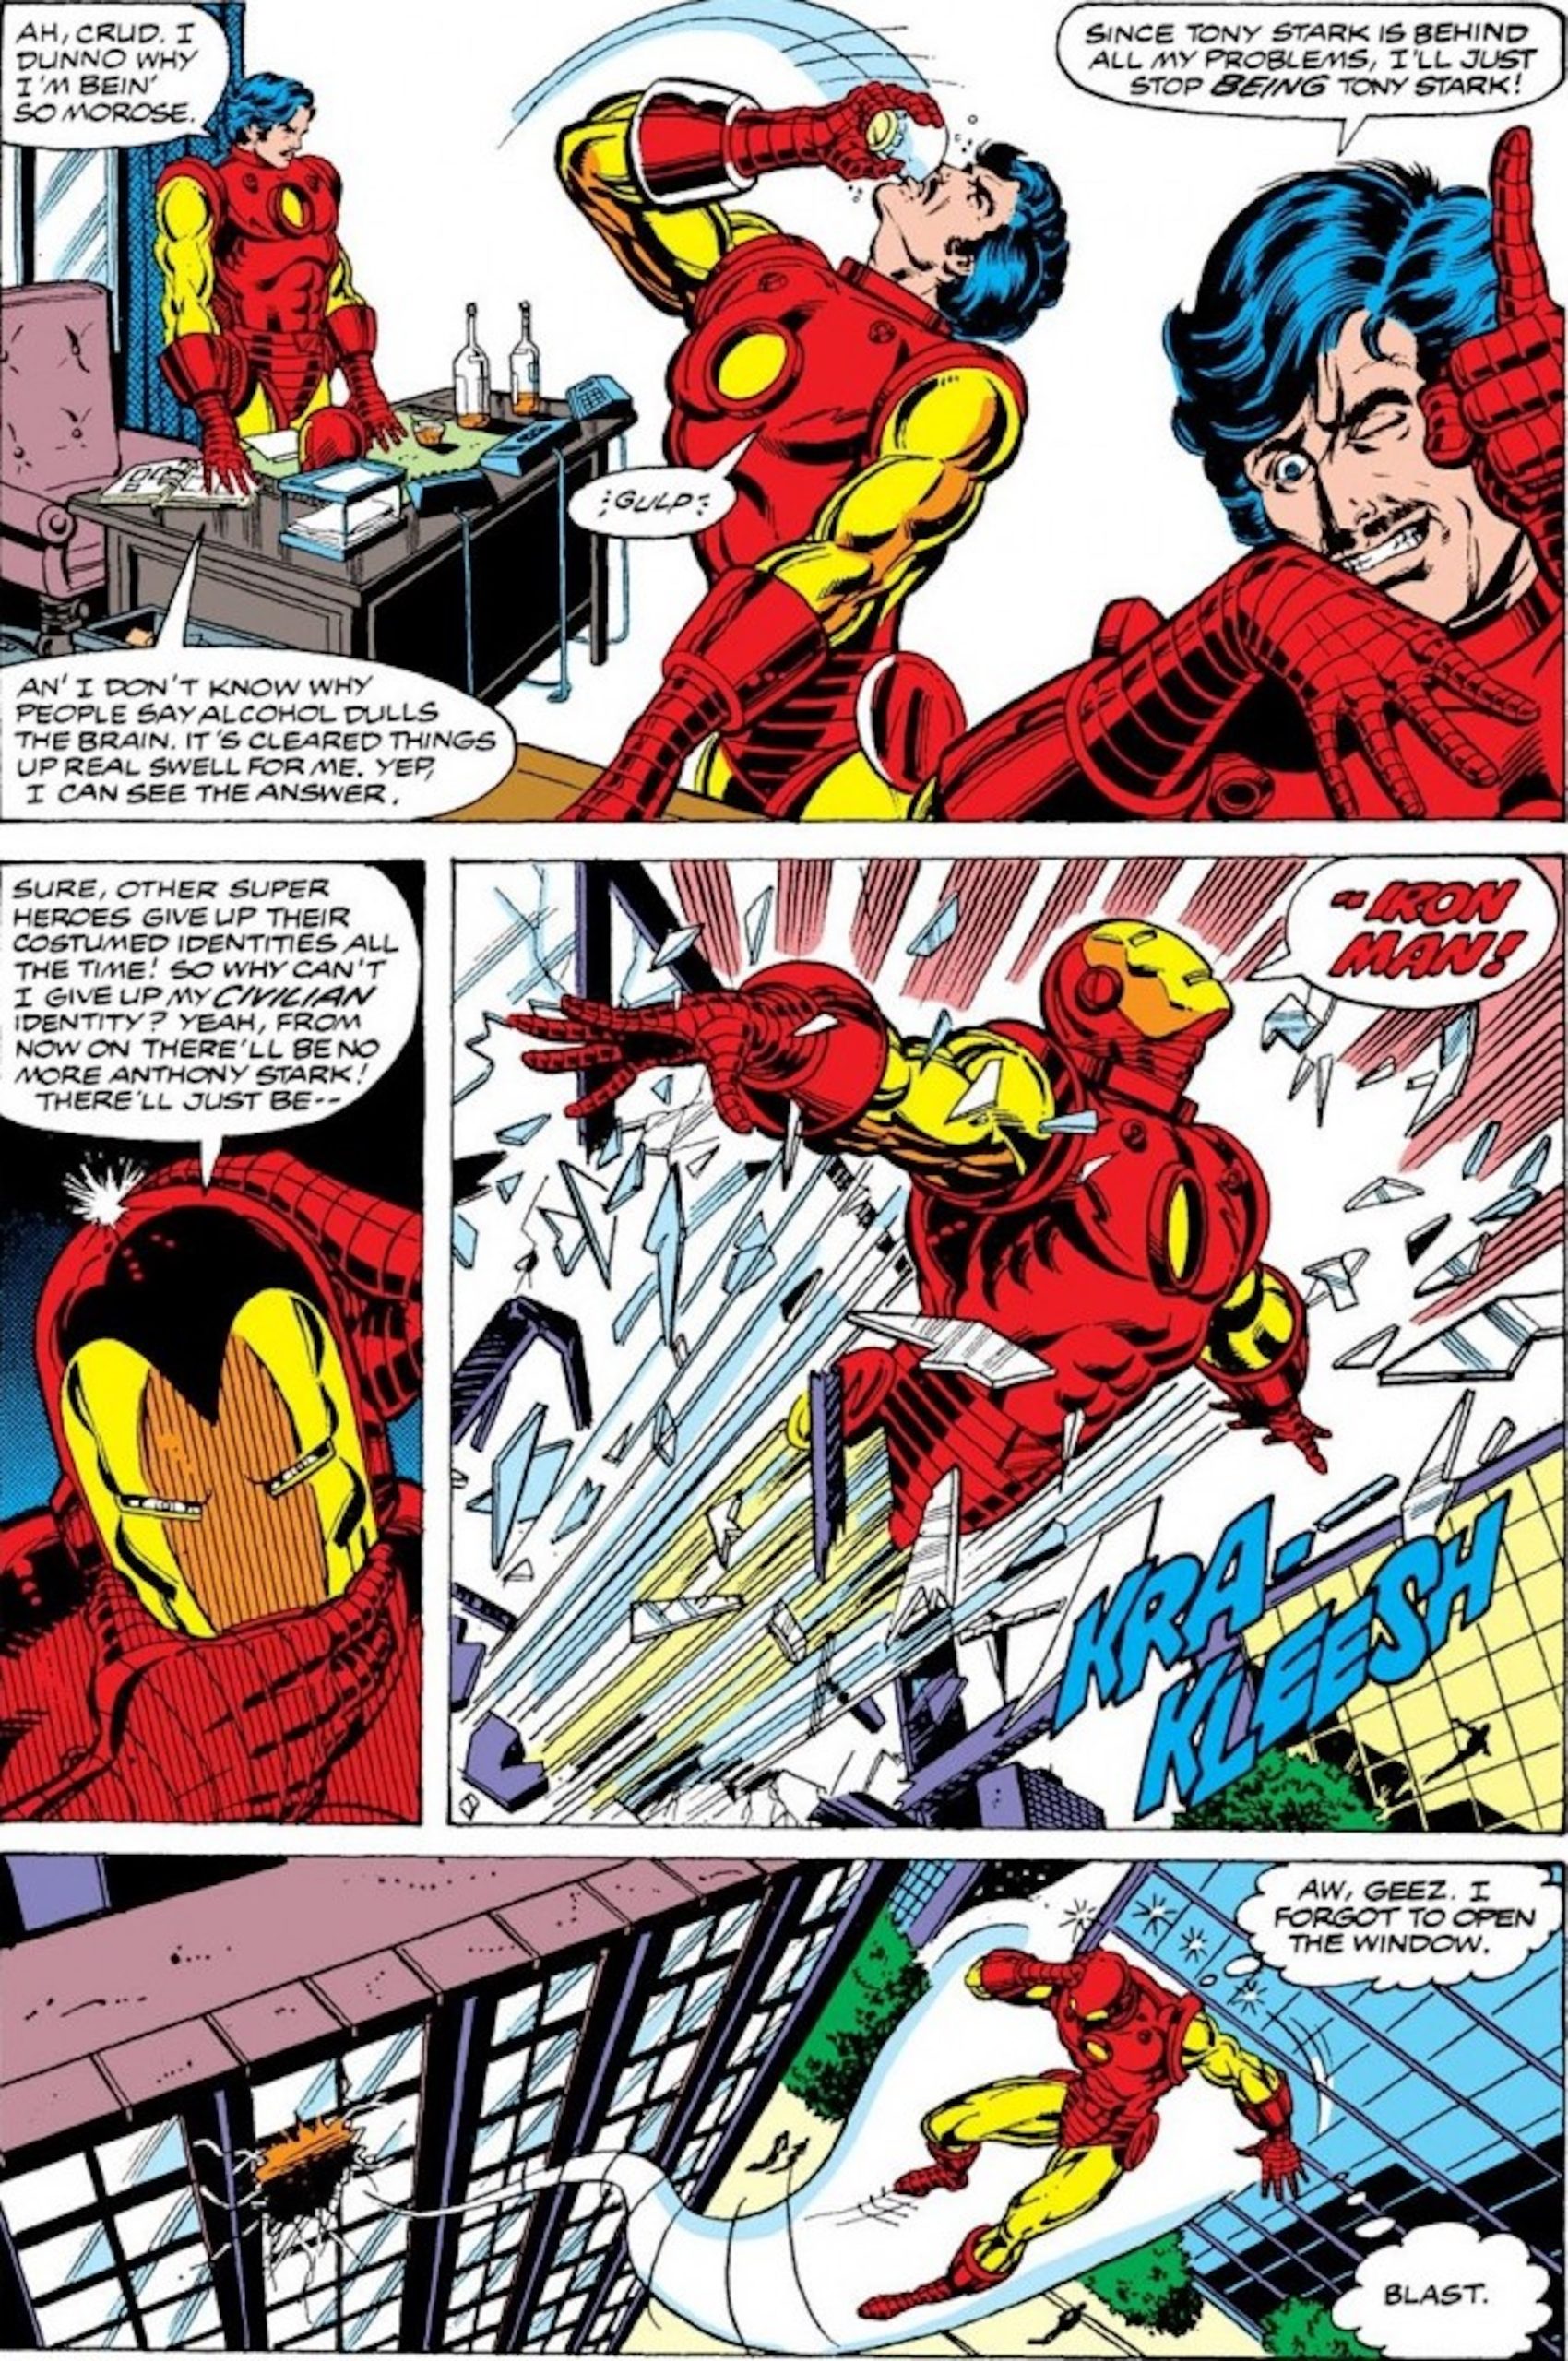 This is a comic strip from Iron Man Vol 1. #128 (1979), where a drunk Tony Stark blasted through his window. 